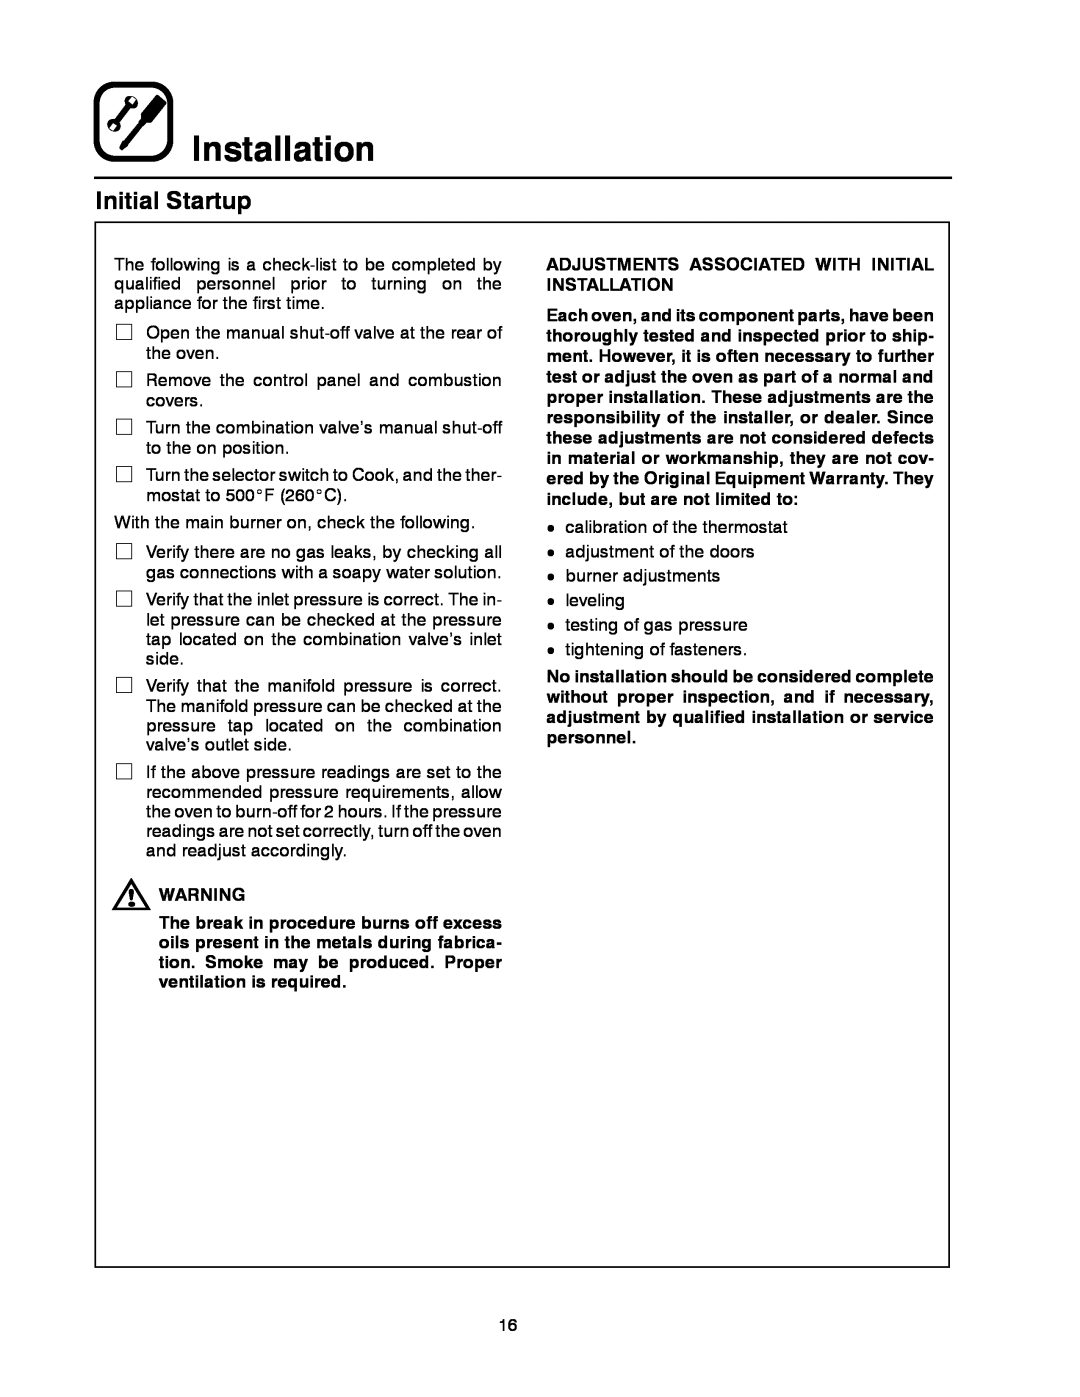 Blodgett DFG-50 manual Initial Startup, Adjustments Associated With Initial Installation 